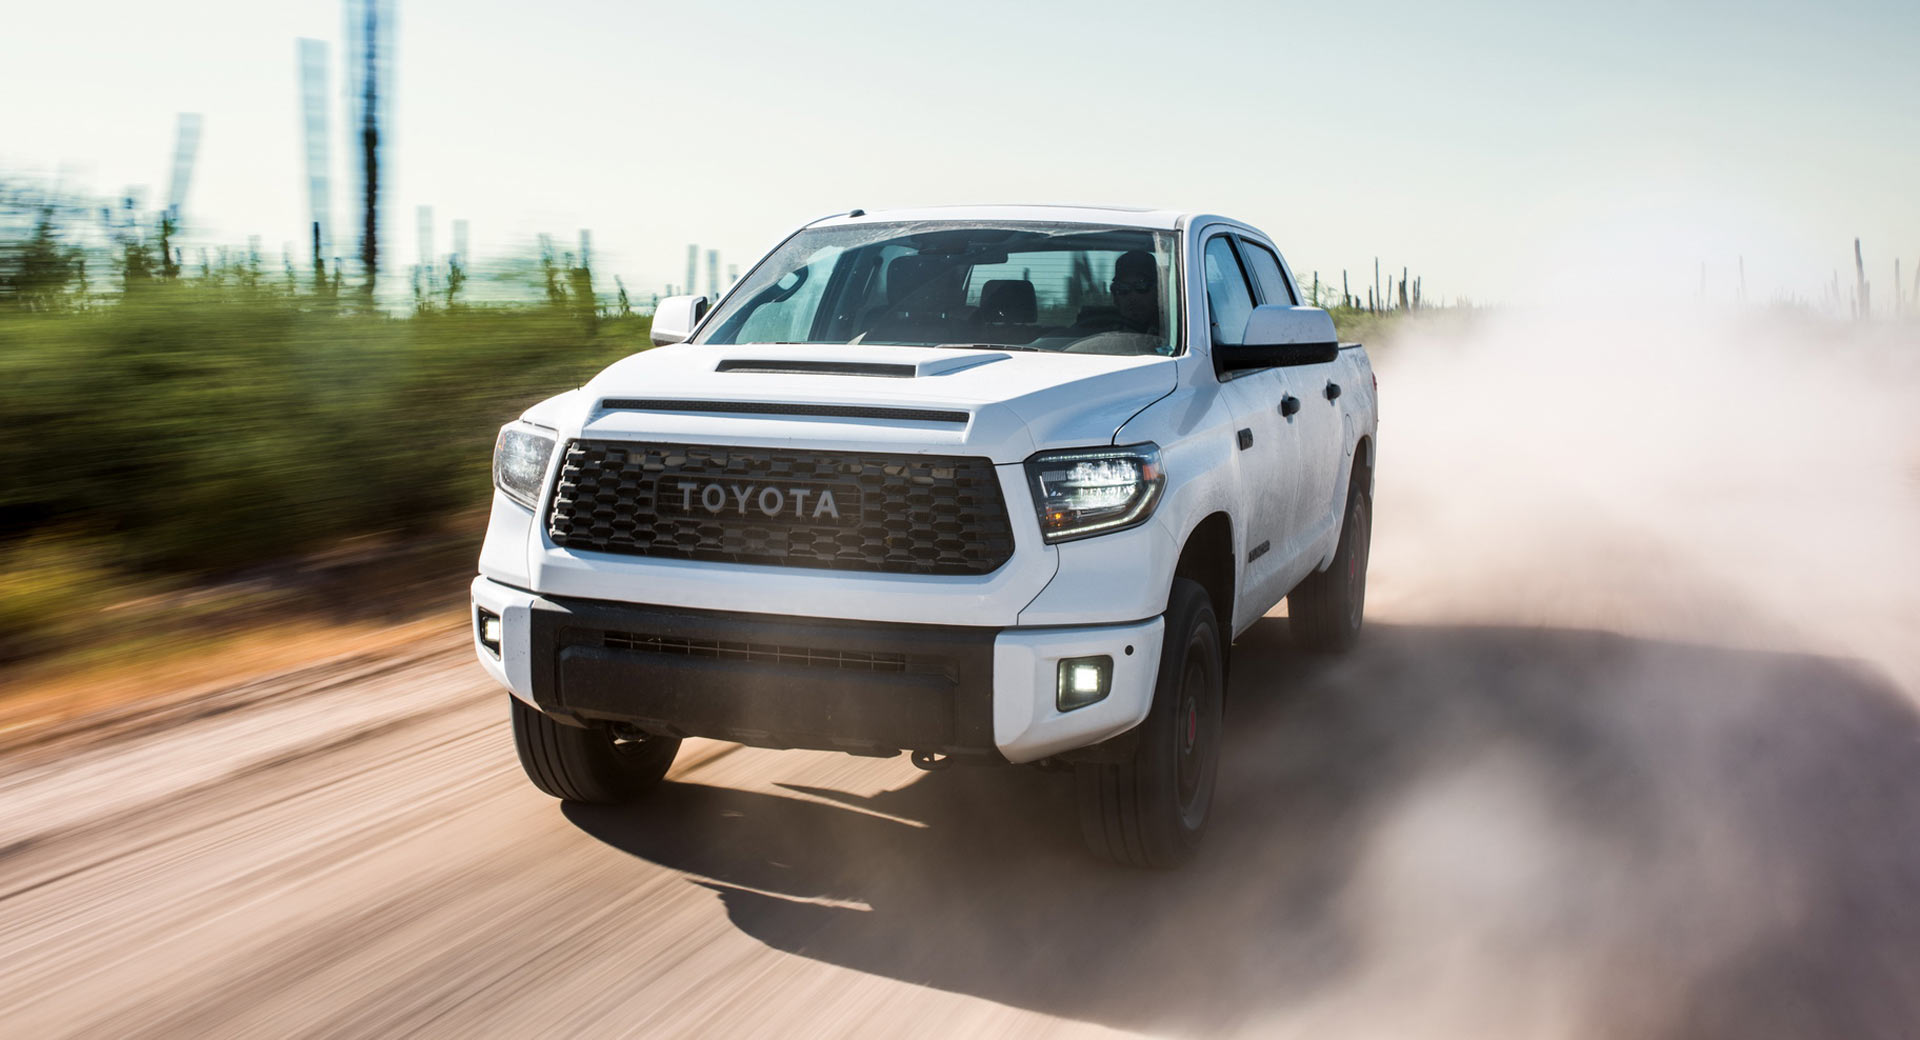 679 Awesome 2018 toyota tundra wheel torque specs for Speed